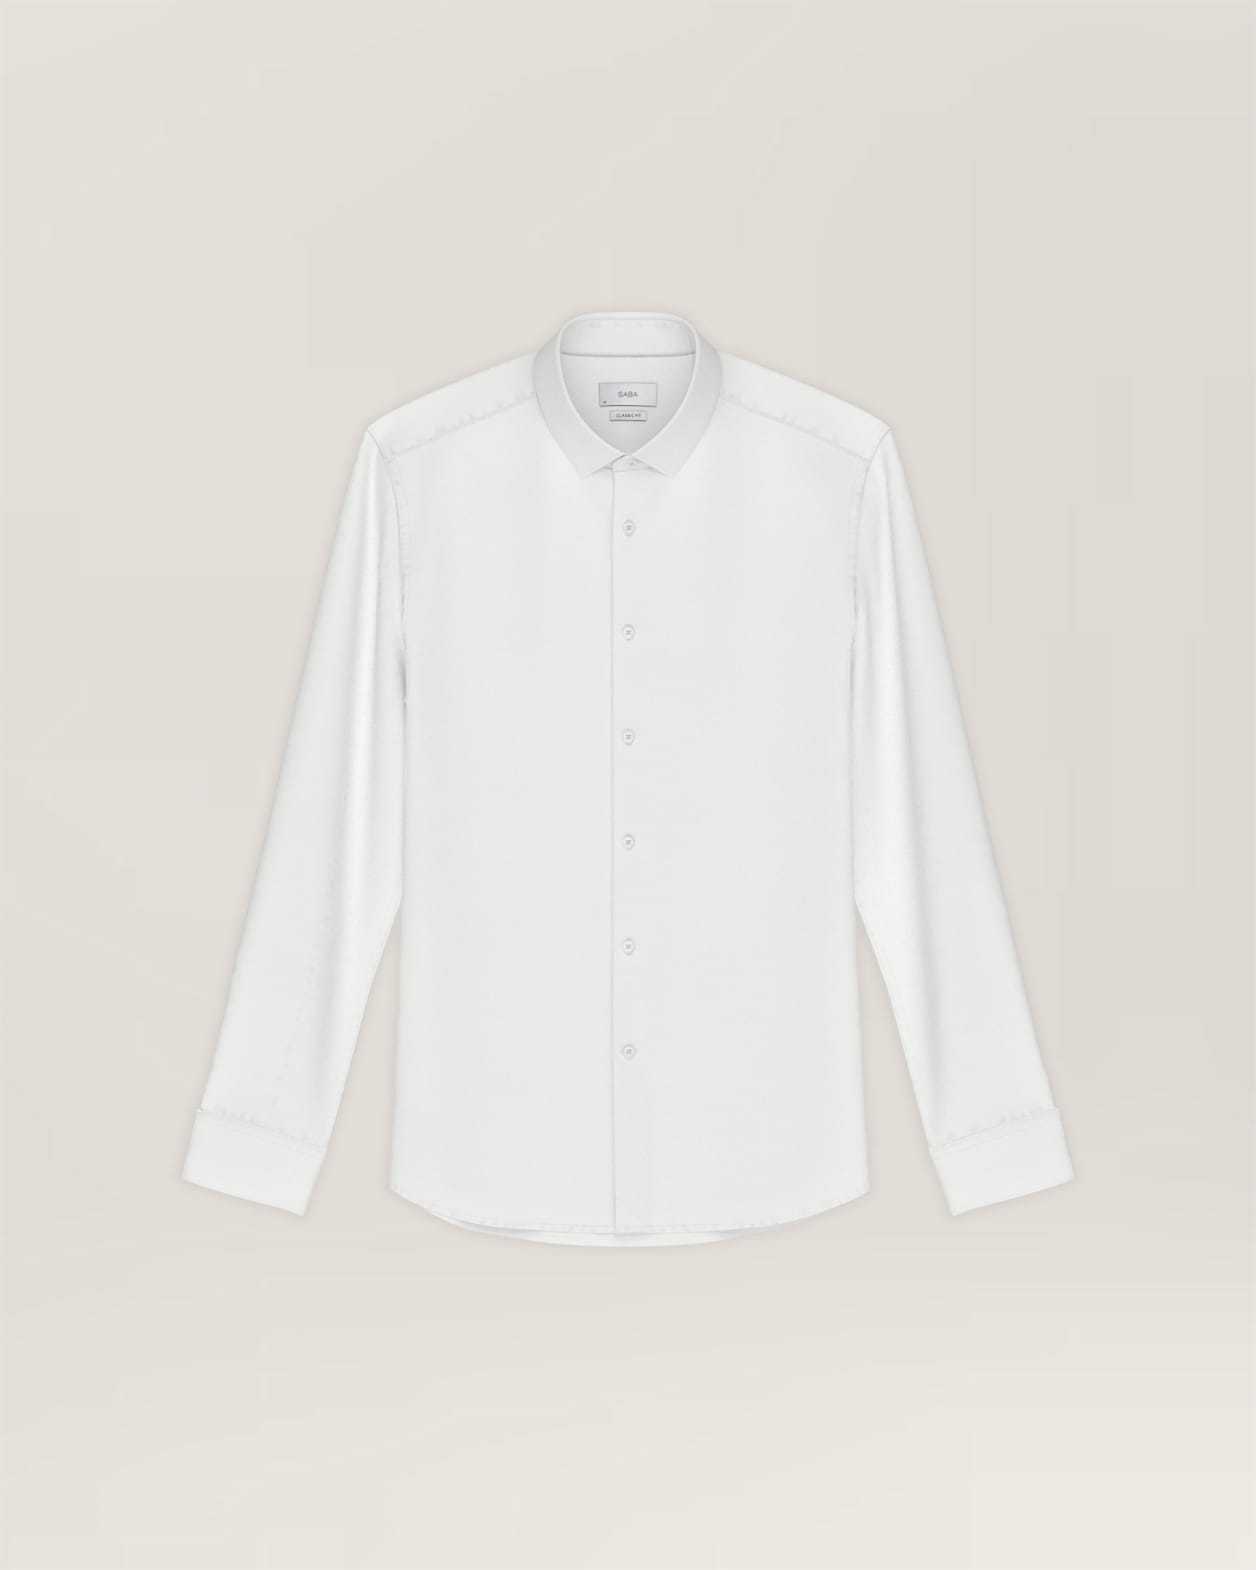 Munroe Easy Care Shirt in WHITE